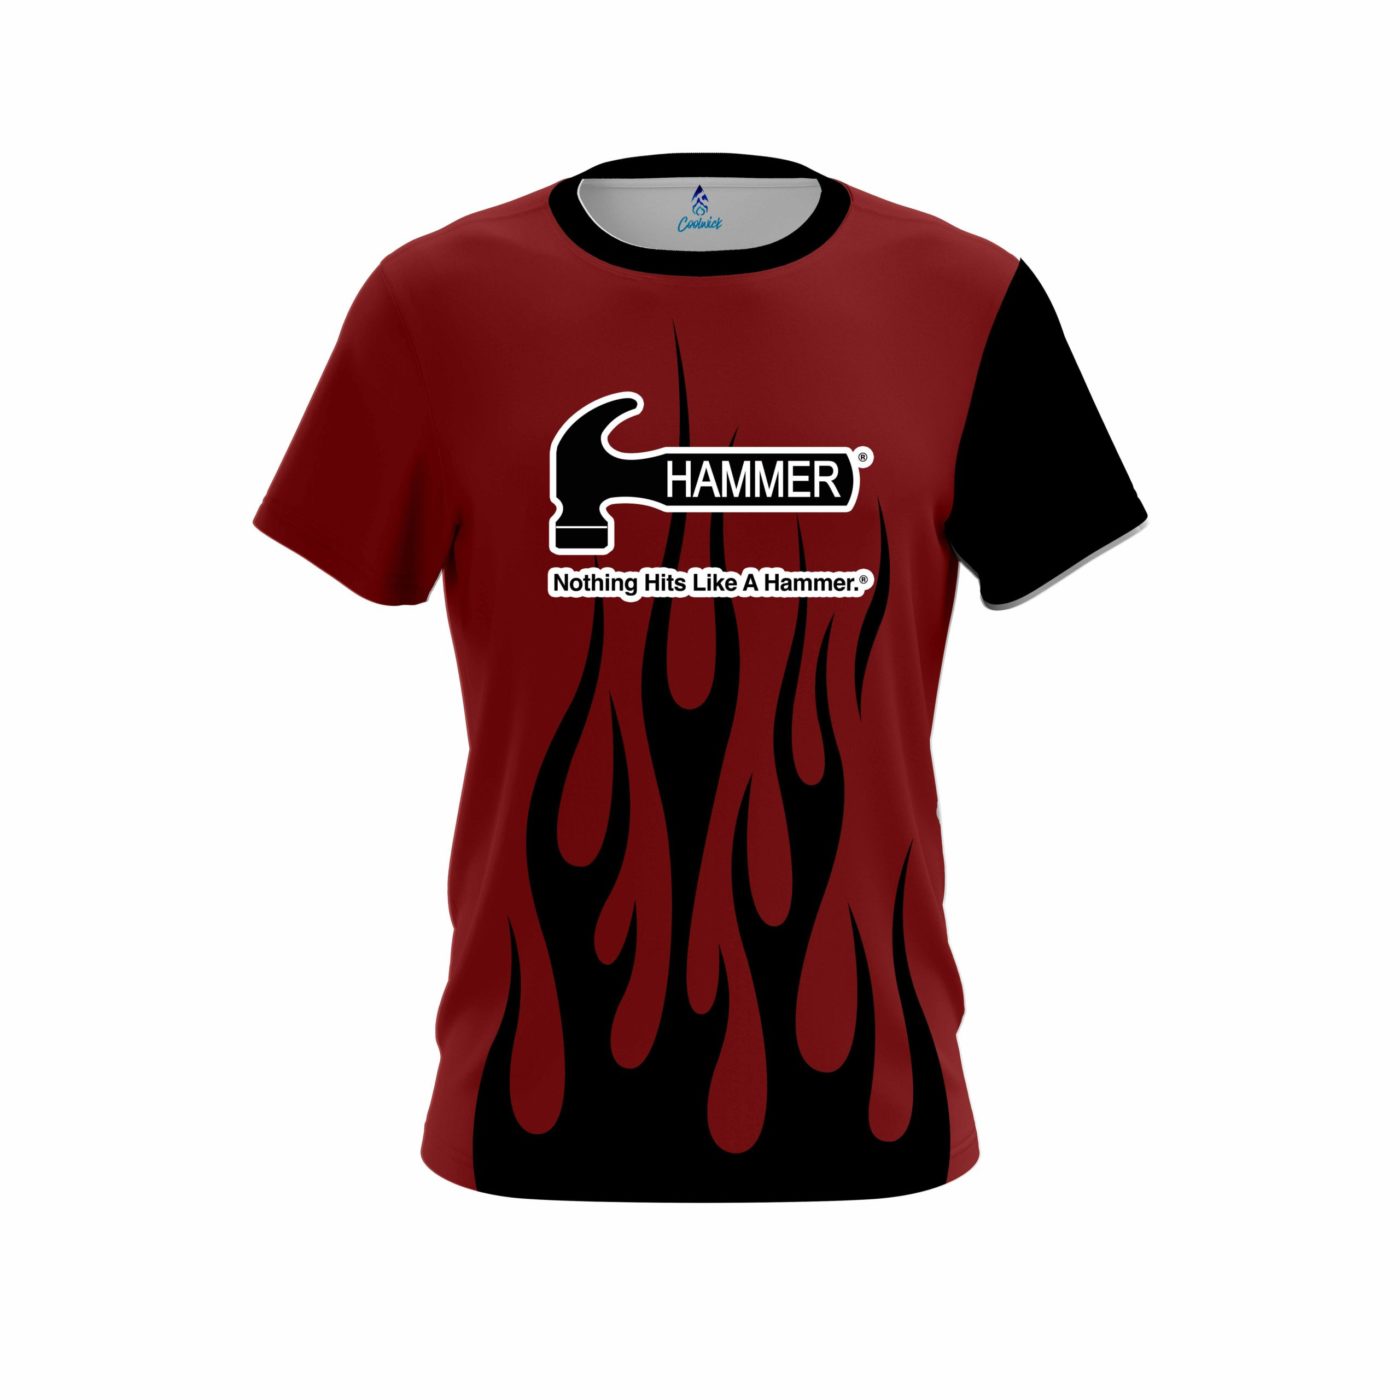 Hammer Red Brick Flaming CoolWick Bowling Jersey Questions & Answers